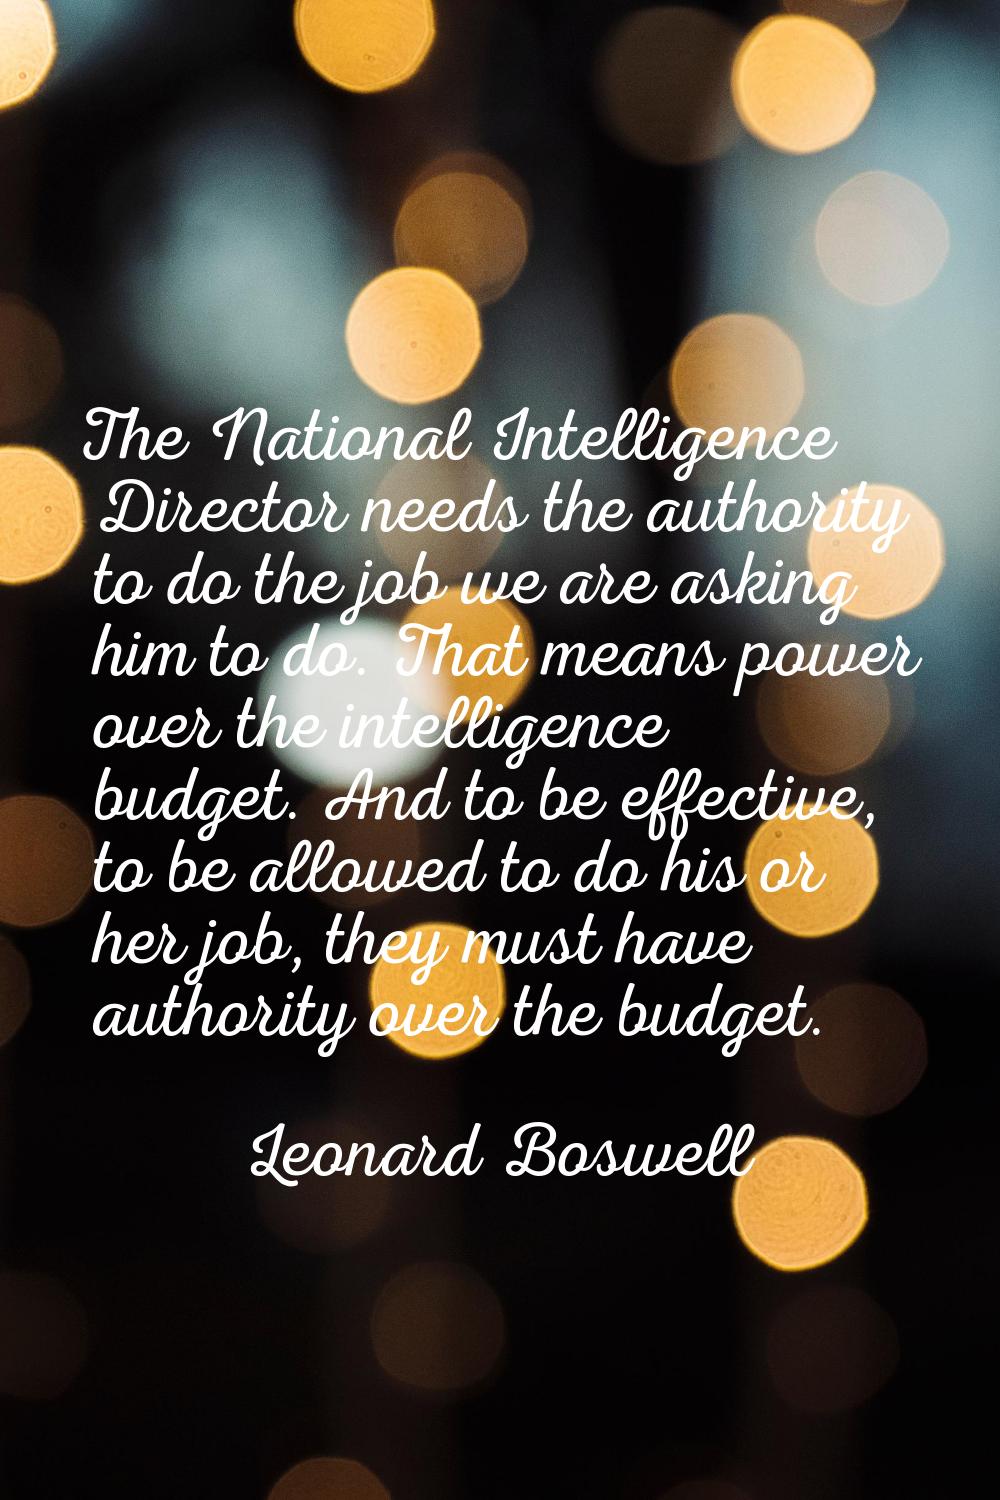 The National Intelligence Director needs the authority to do the job we are asking him to do. That 